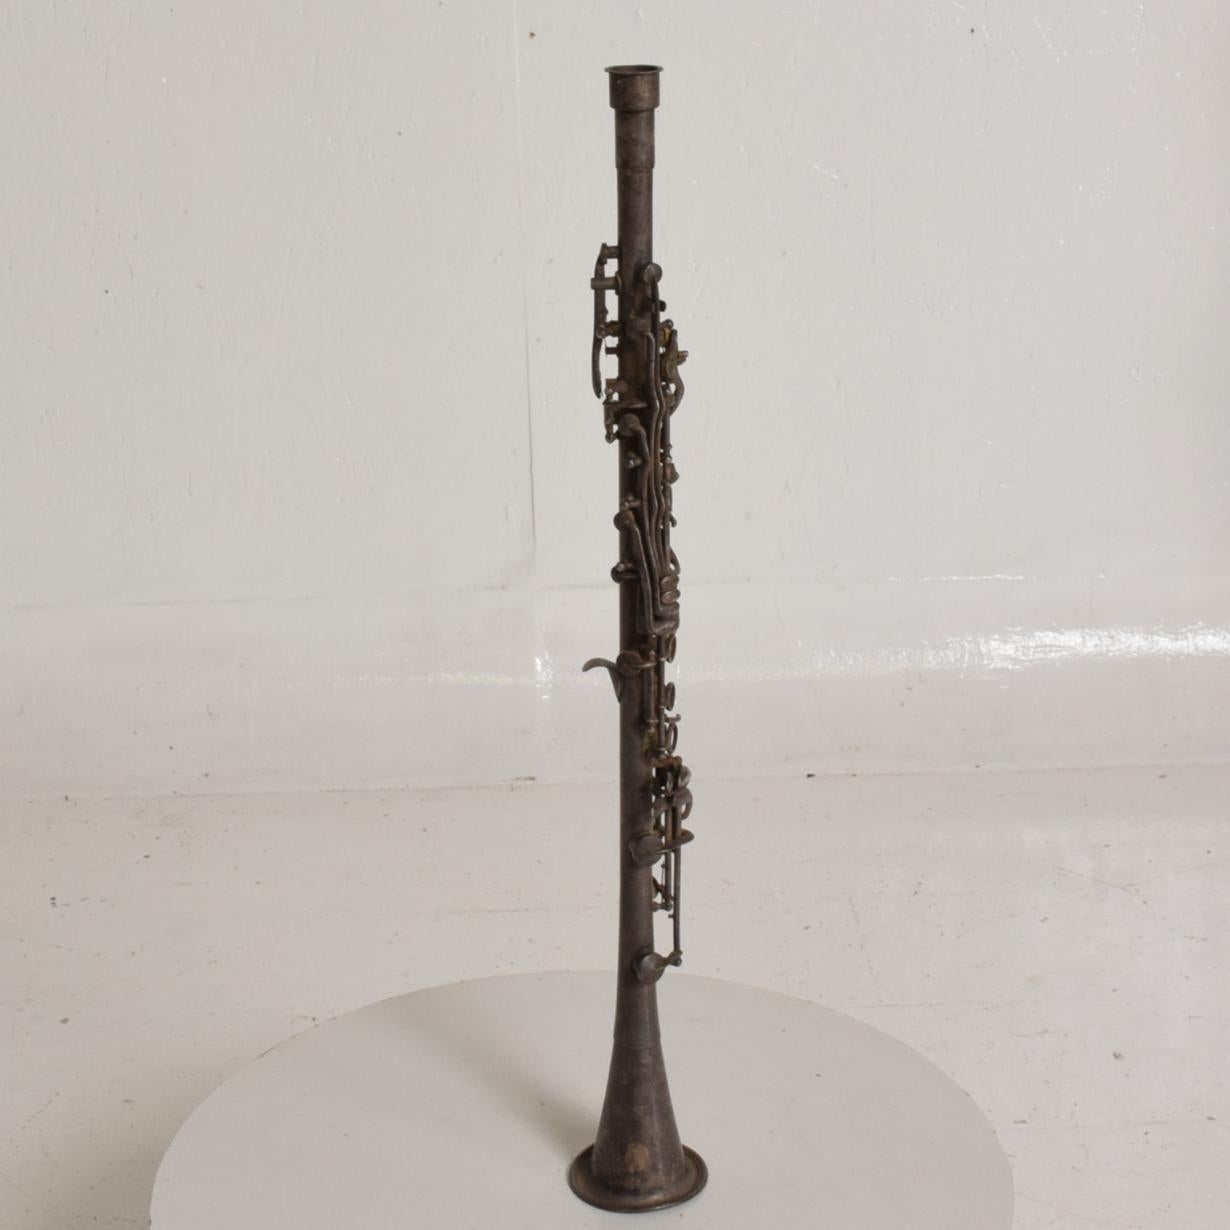 For your consideration, an antique decorative European Clarinet Oboe sterling silver plated. Stamped: 